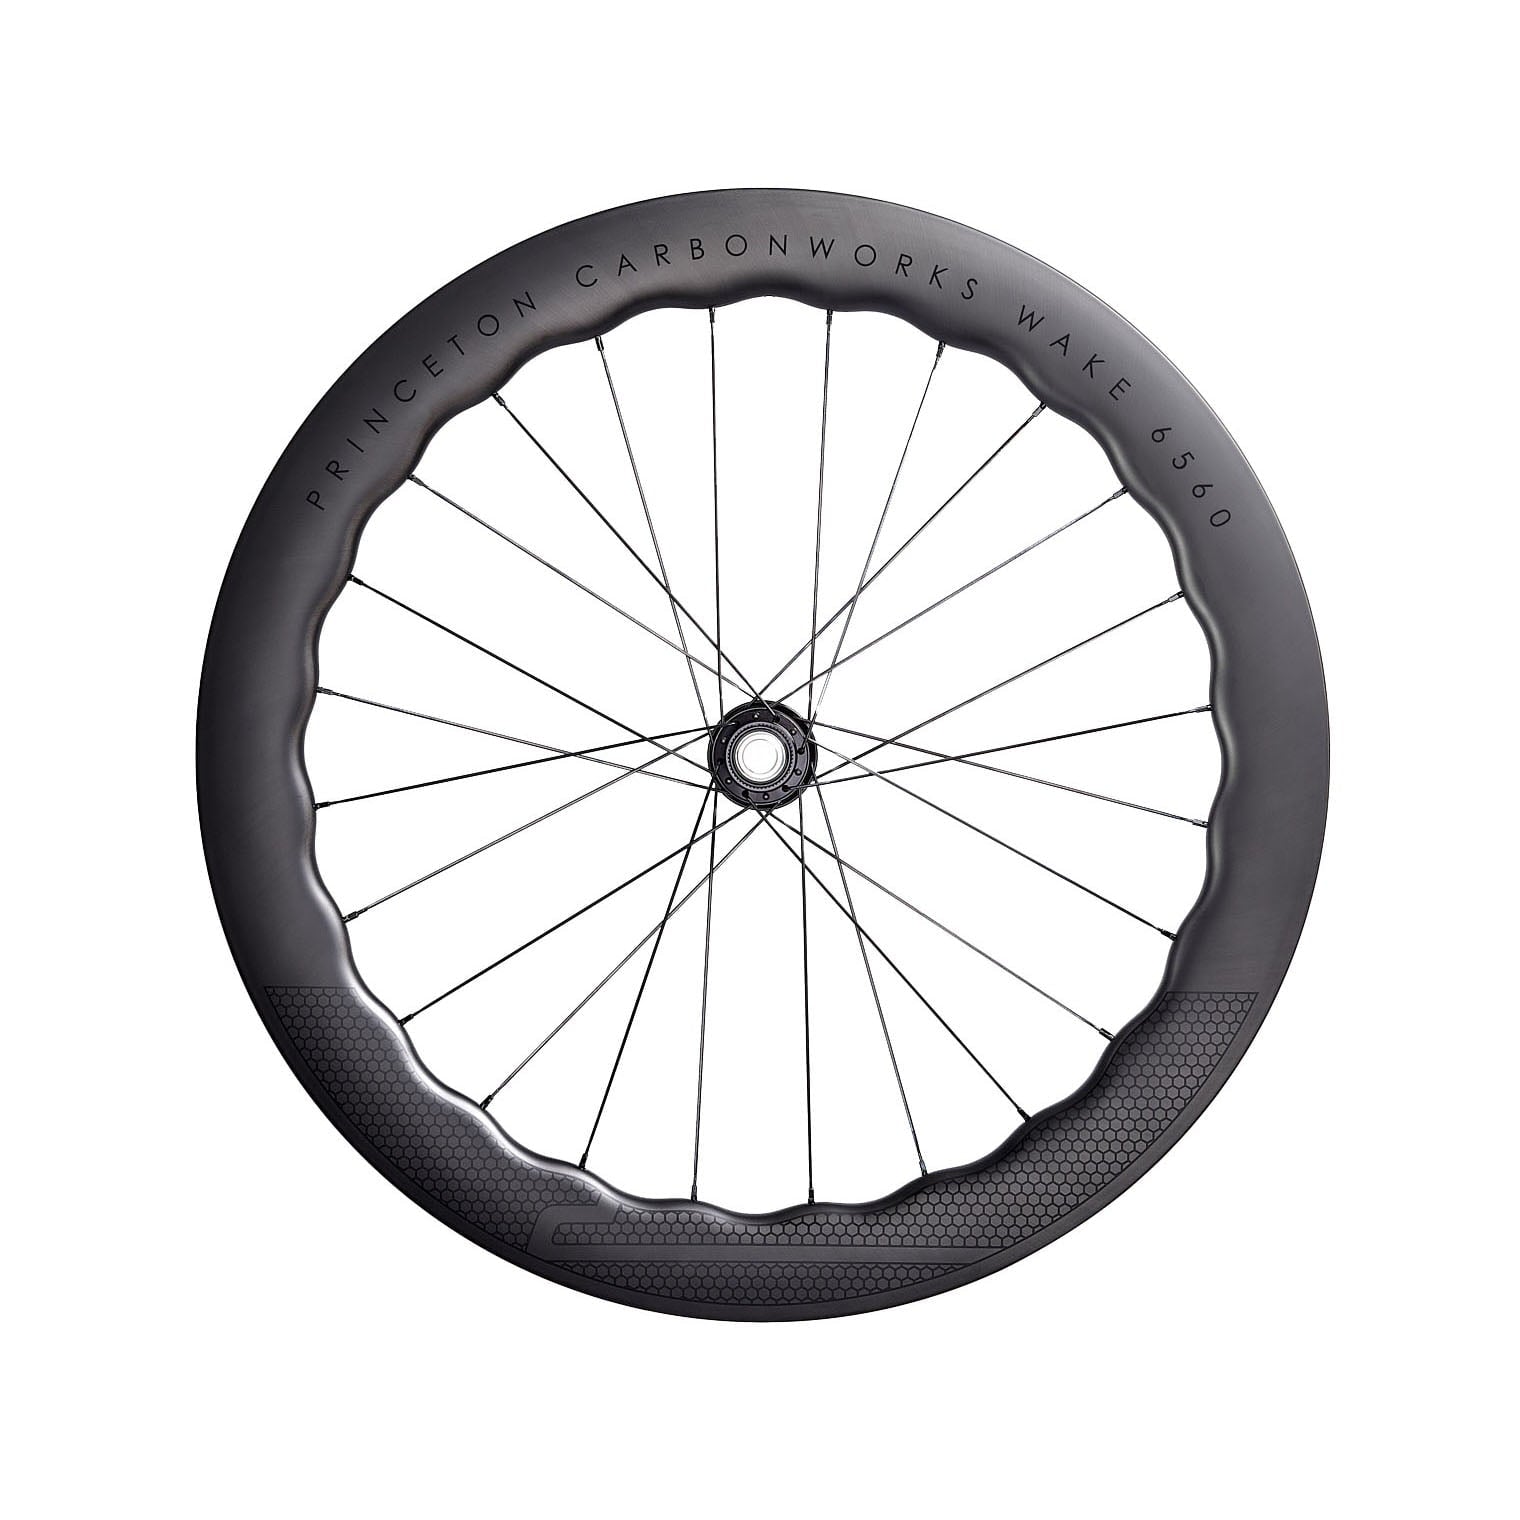 approved cycling princeton carbon works wake 6560 db wheelsets